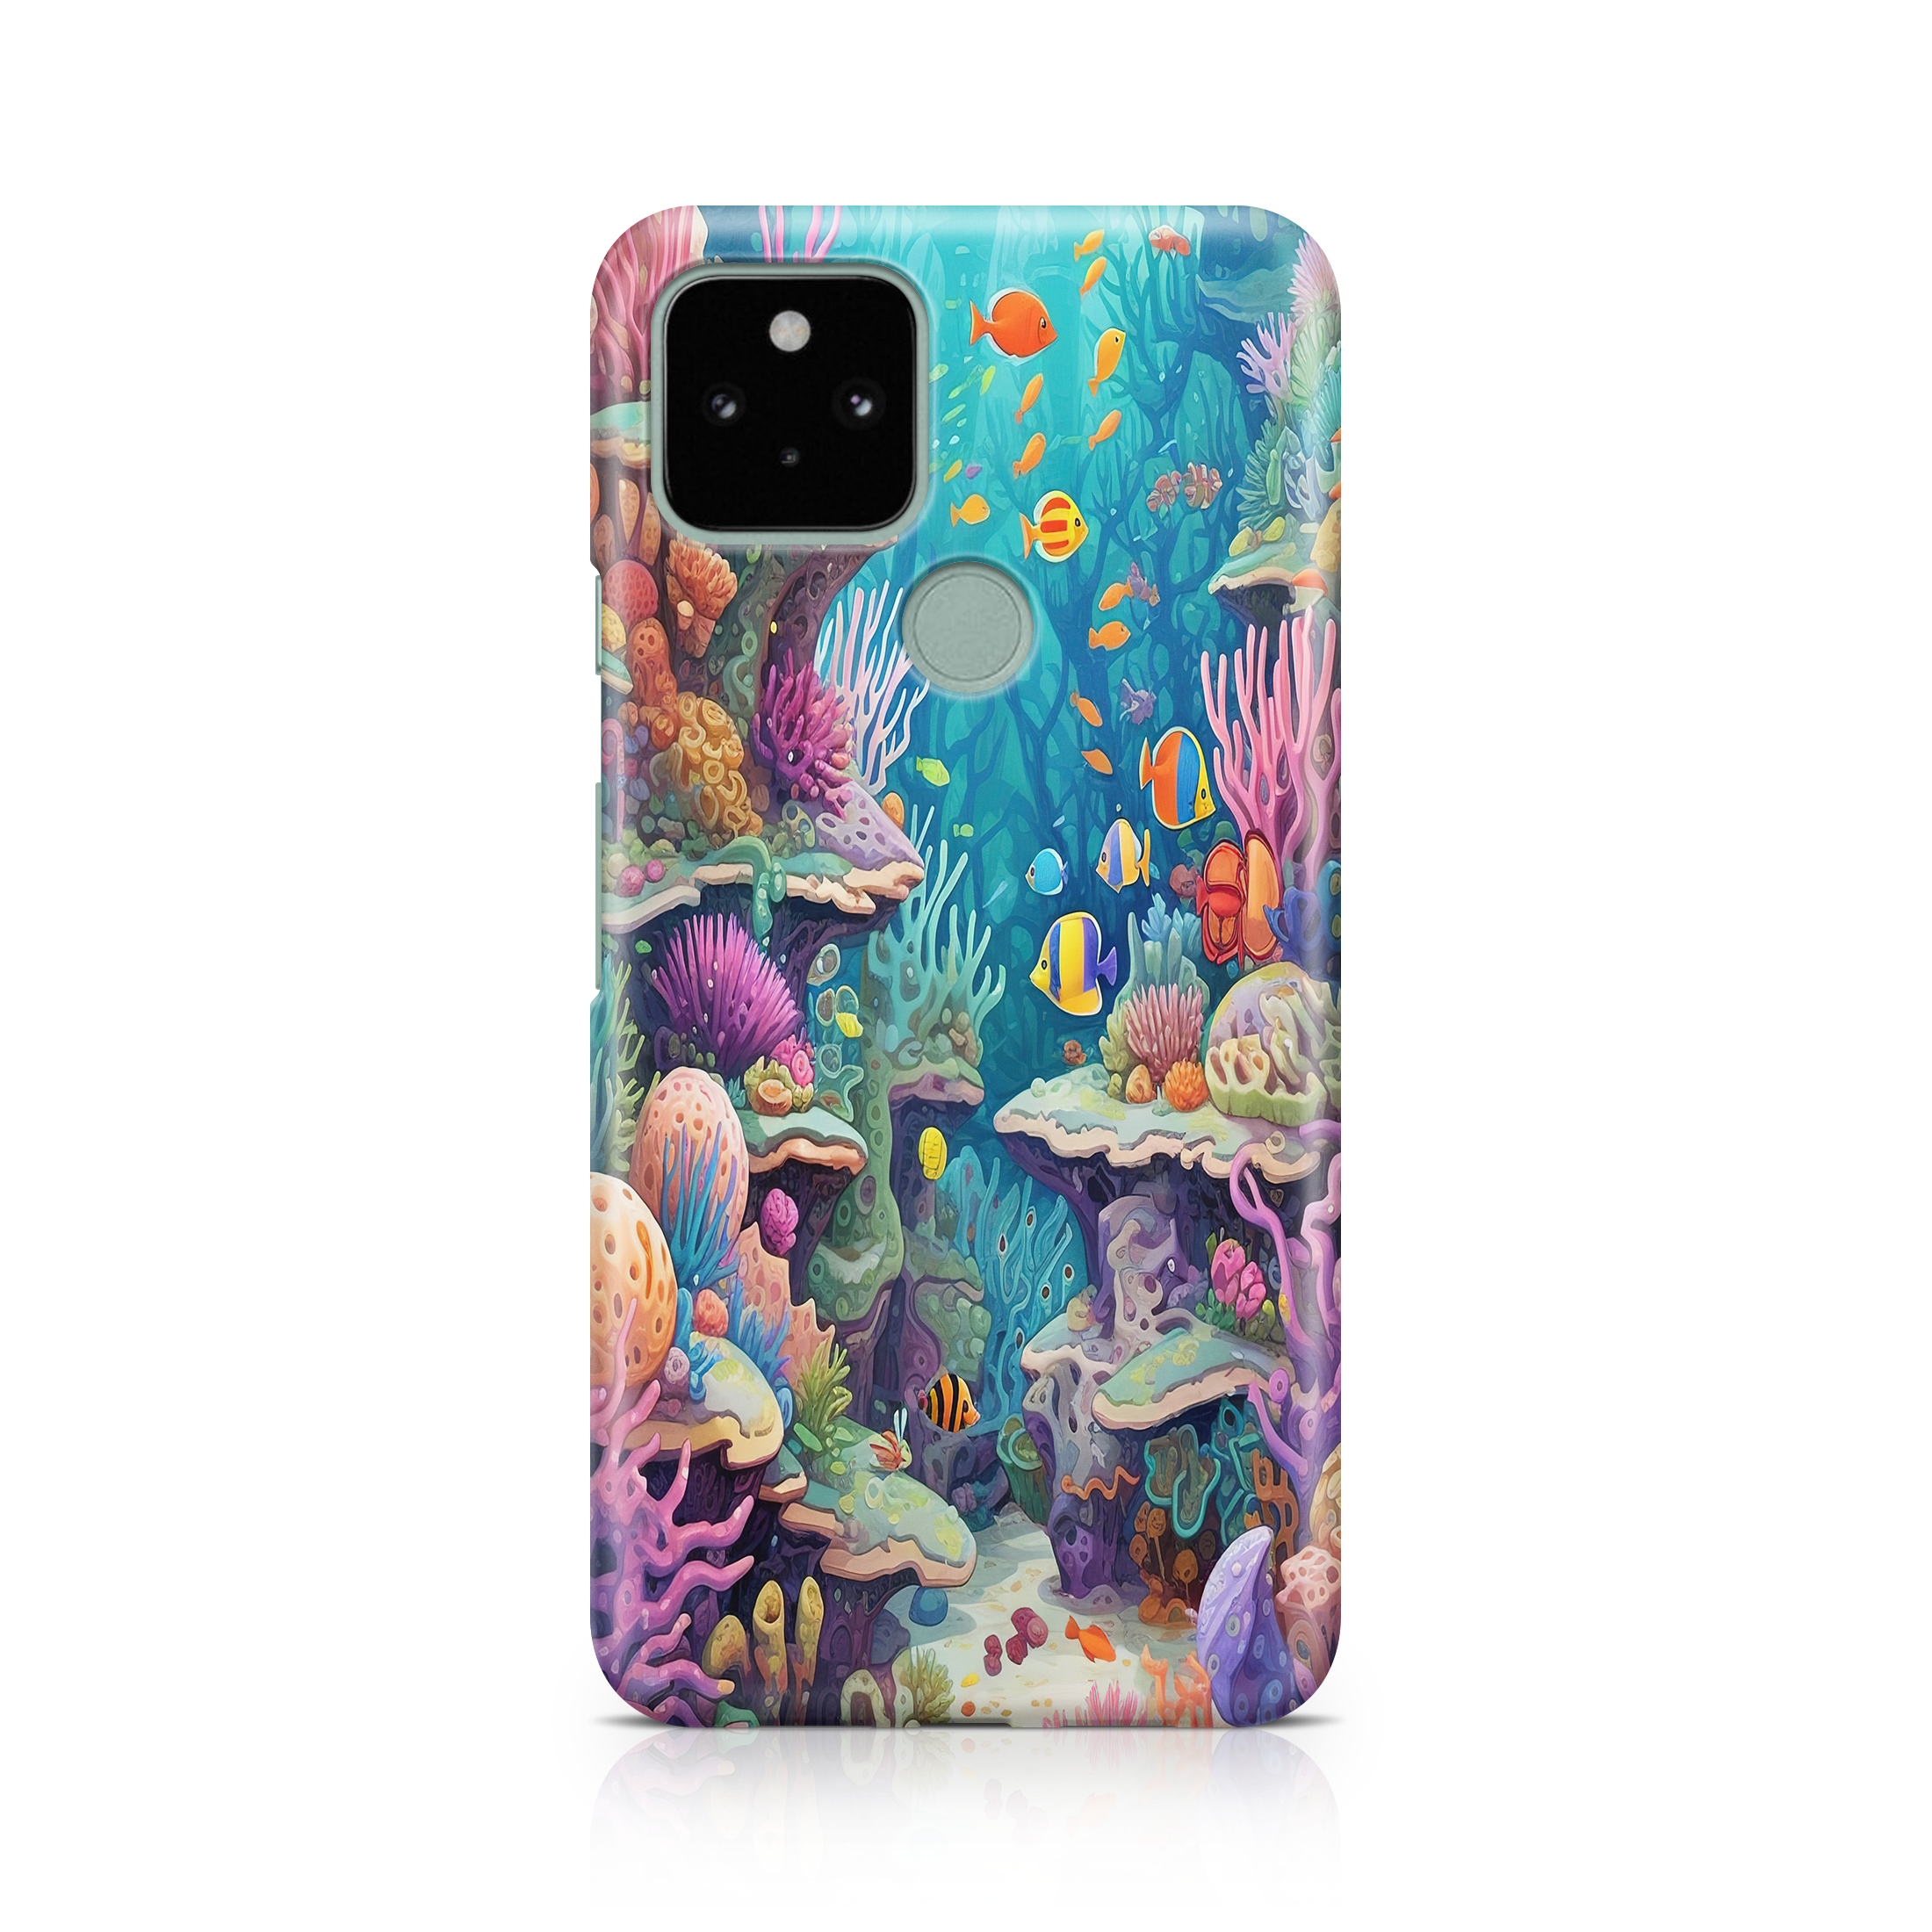 Daydream Coral - Google phone case designs by CaseSwagger